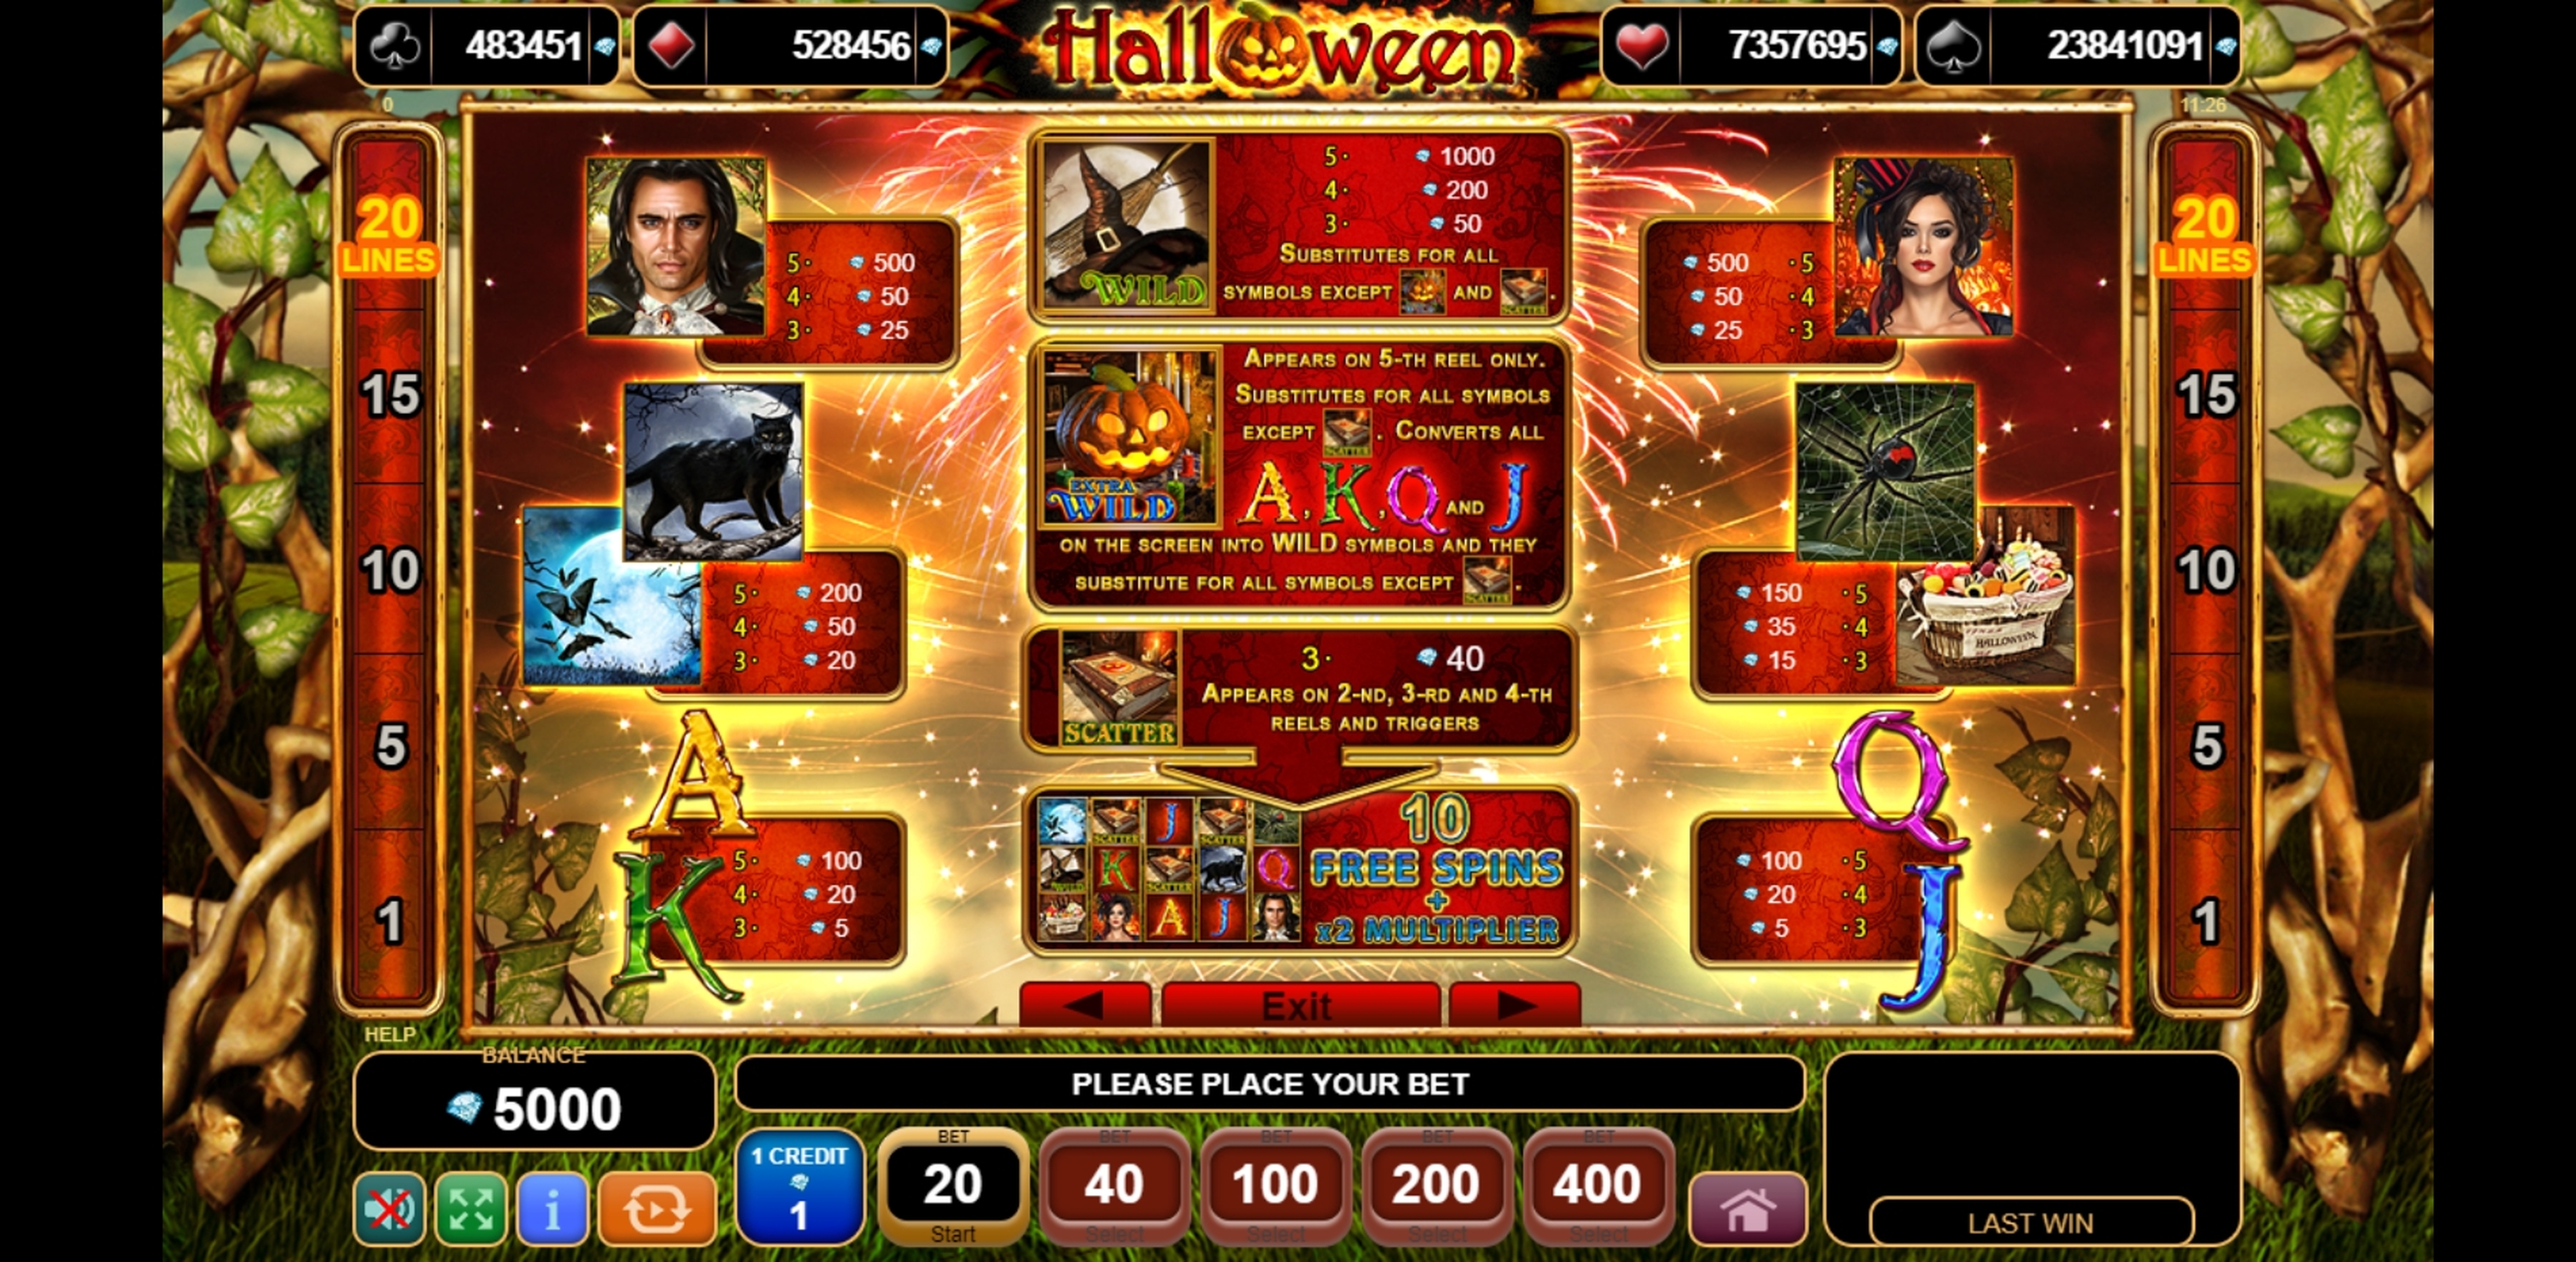 Info of Halloween Slot Game by EGT